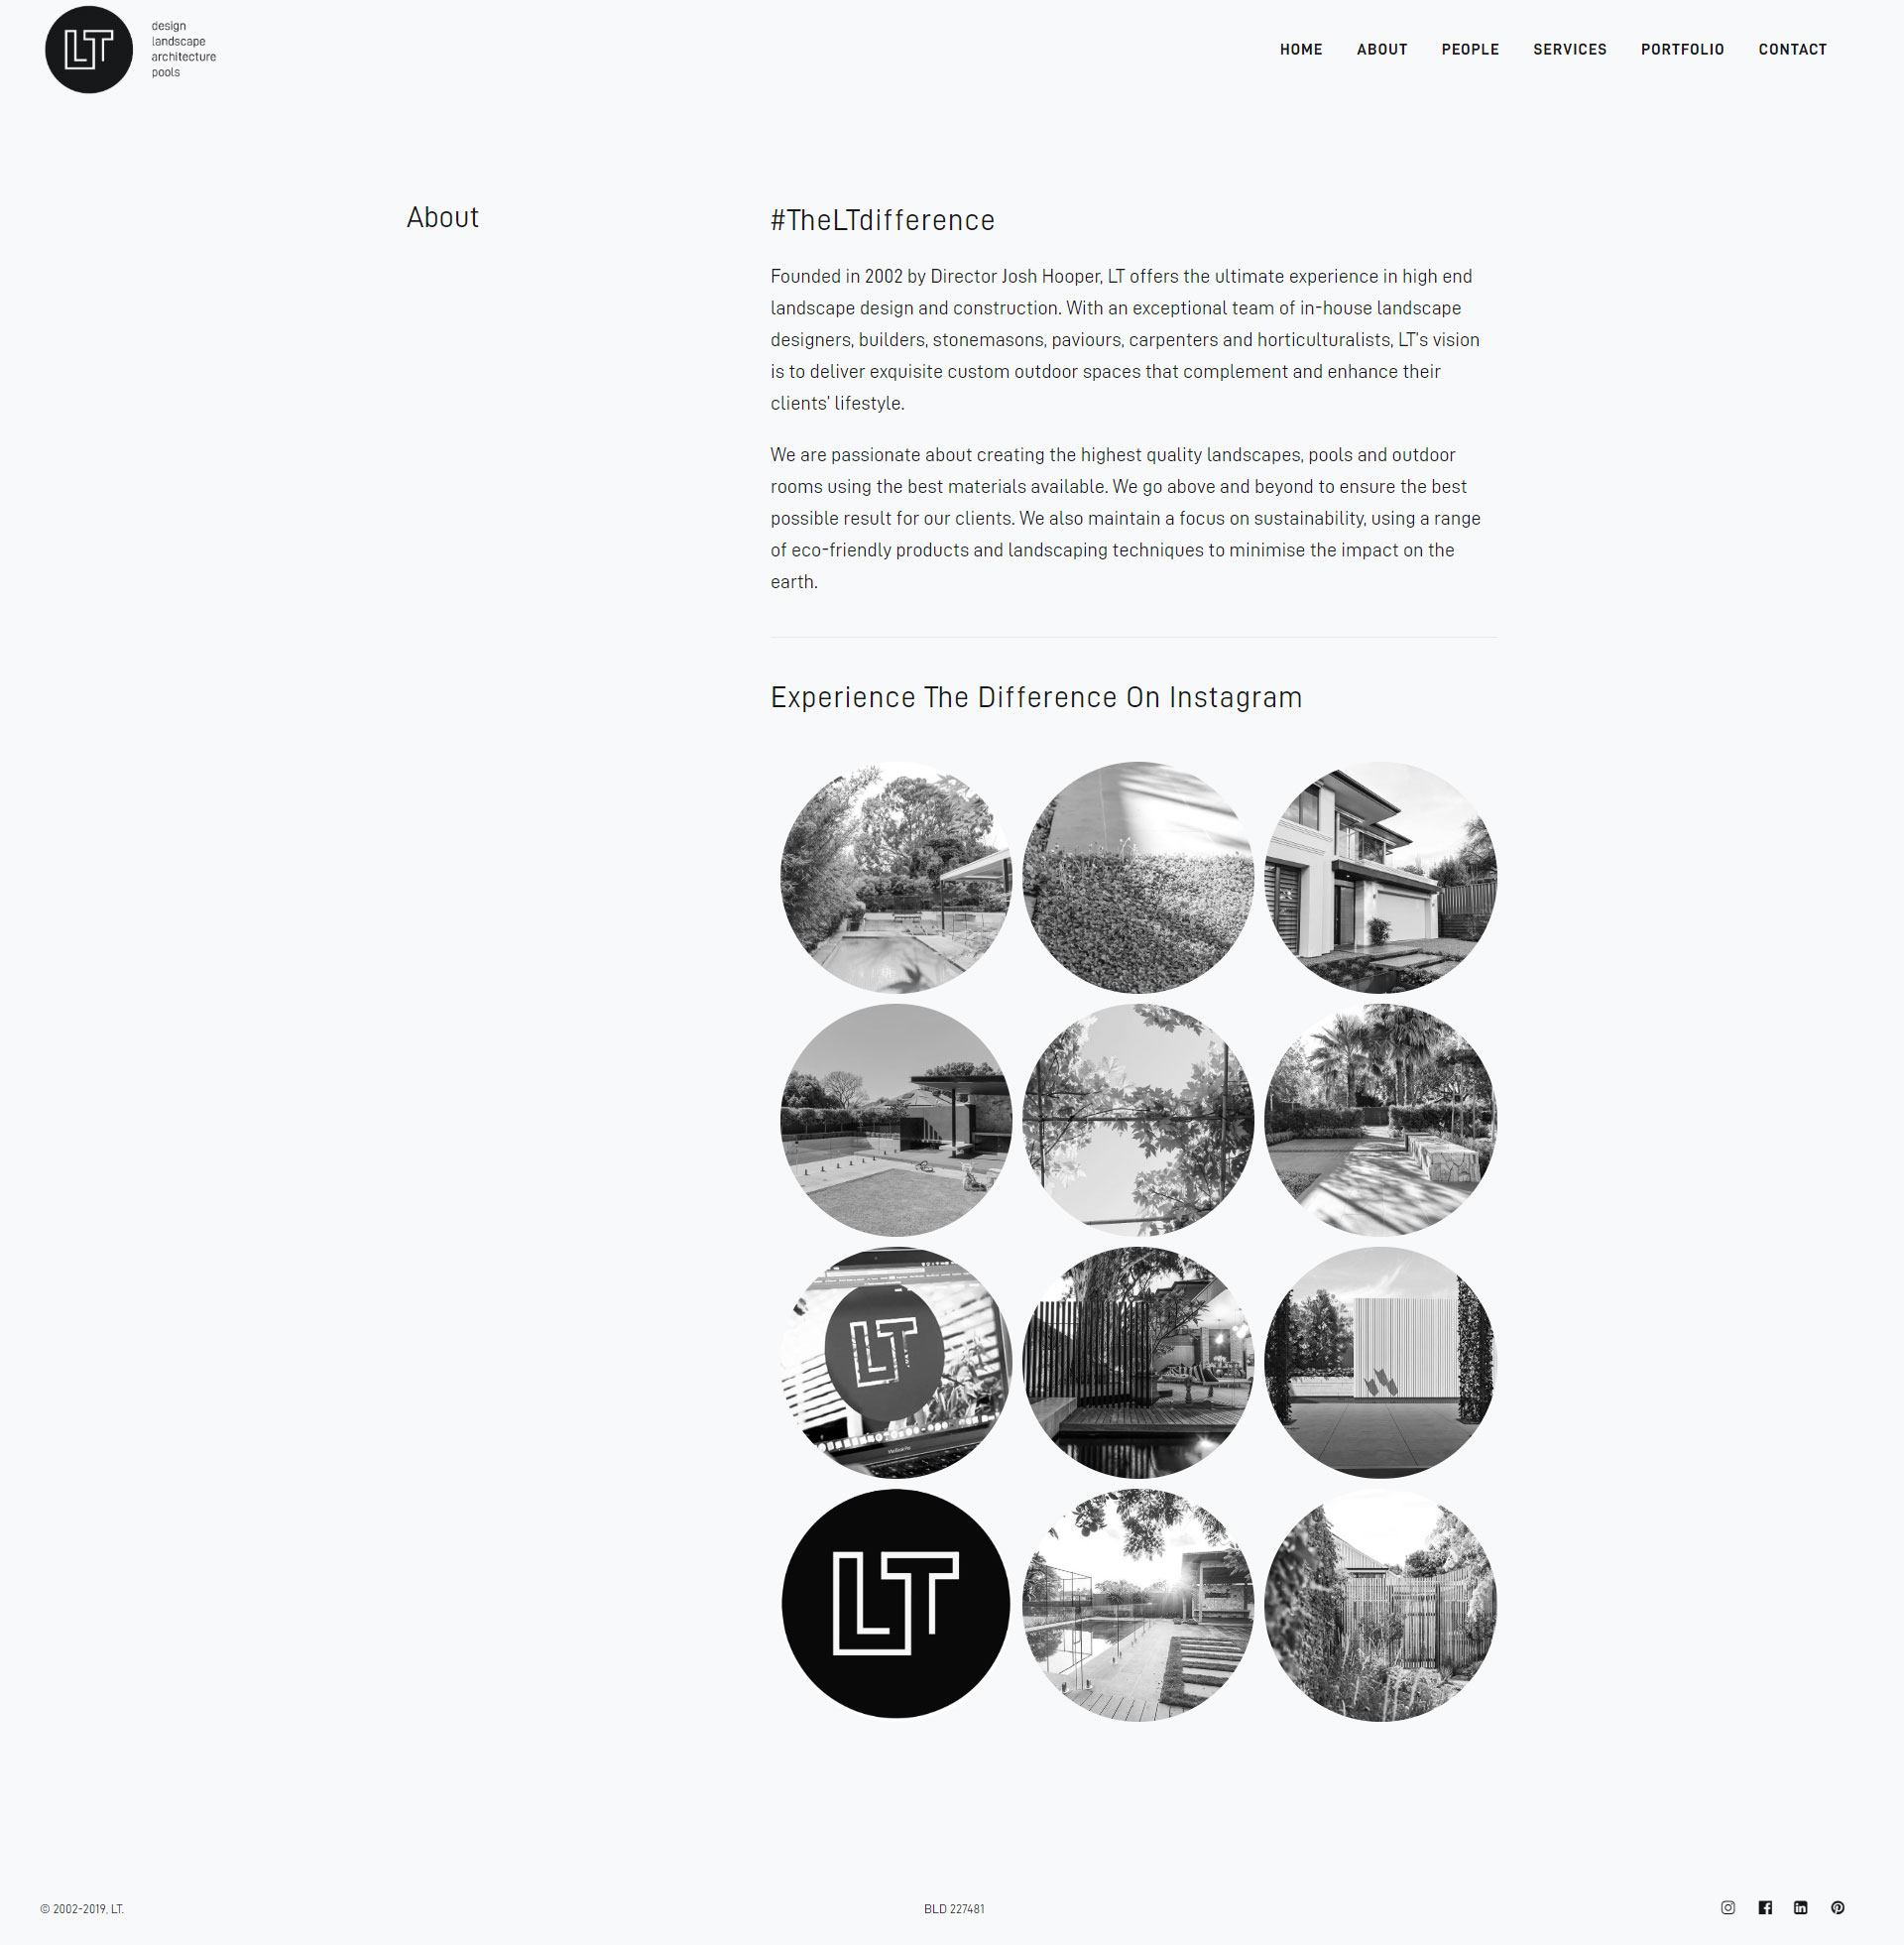 LT's website design of the about page